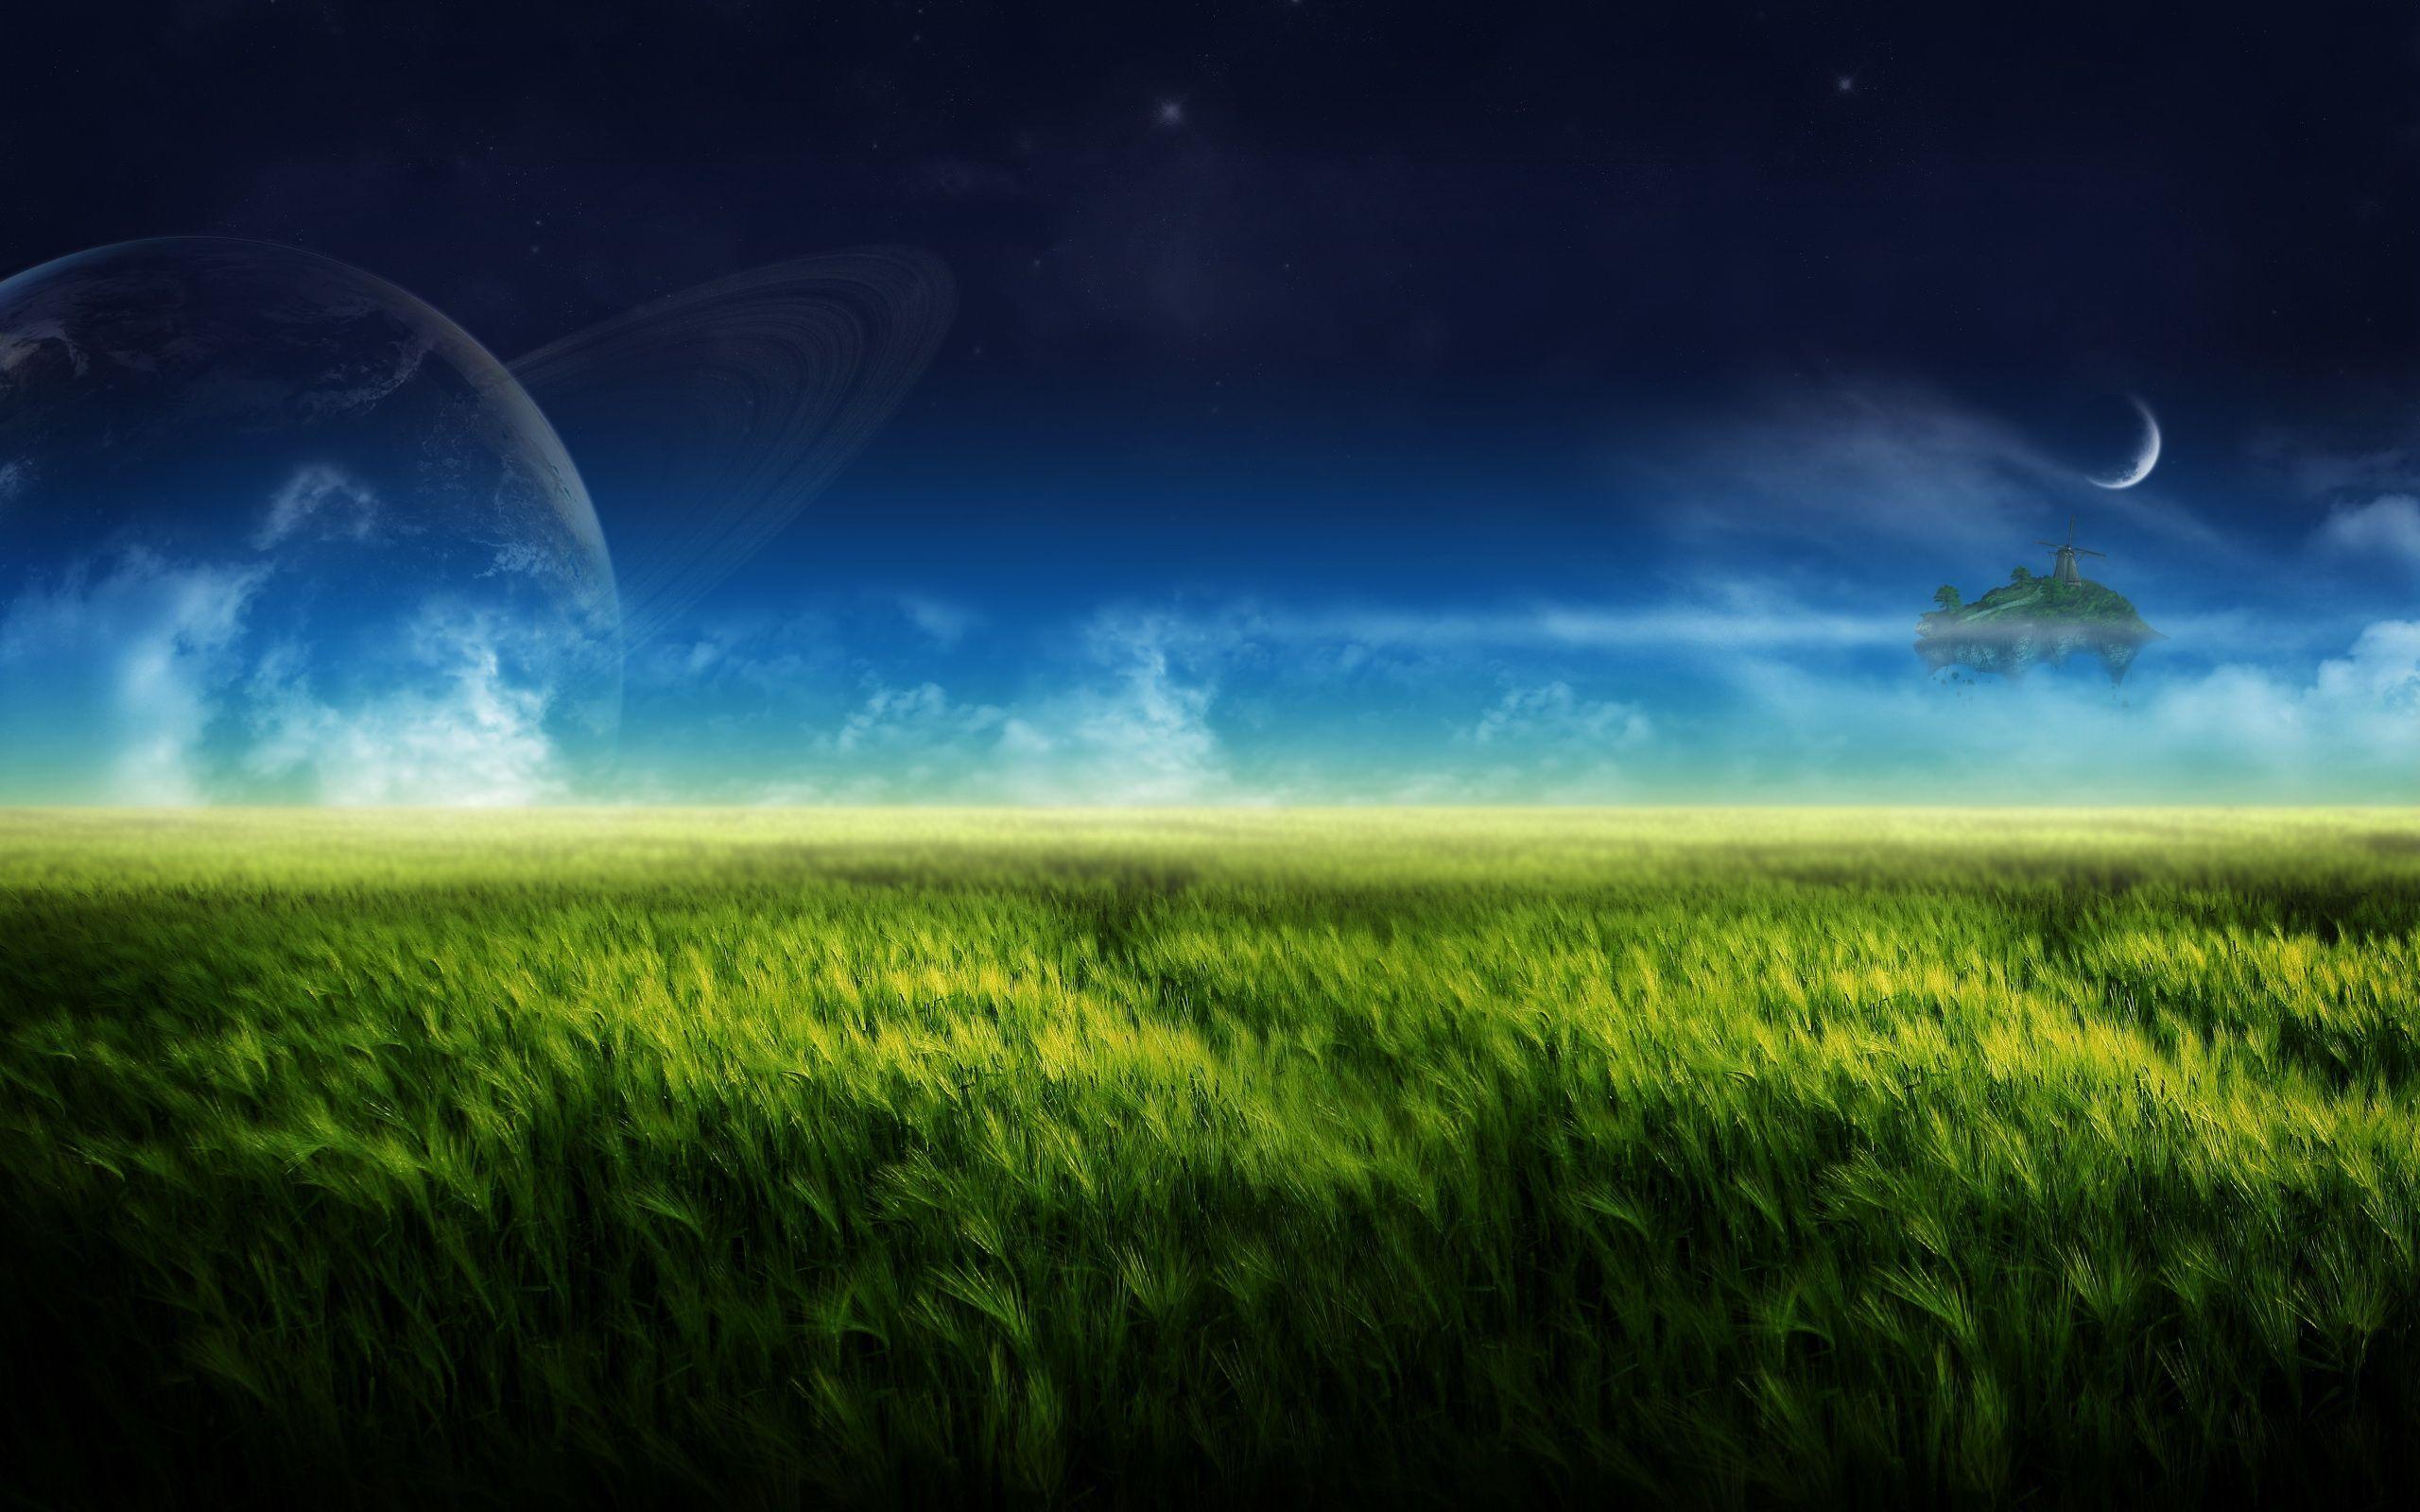 Fantasy Landscape Art Wallpaper, Dreamland. Stock Photo, Picture and  Royalty Free Image. Image 208355508.